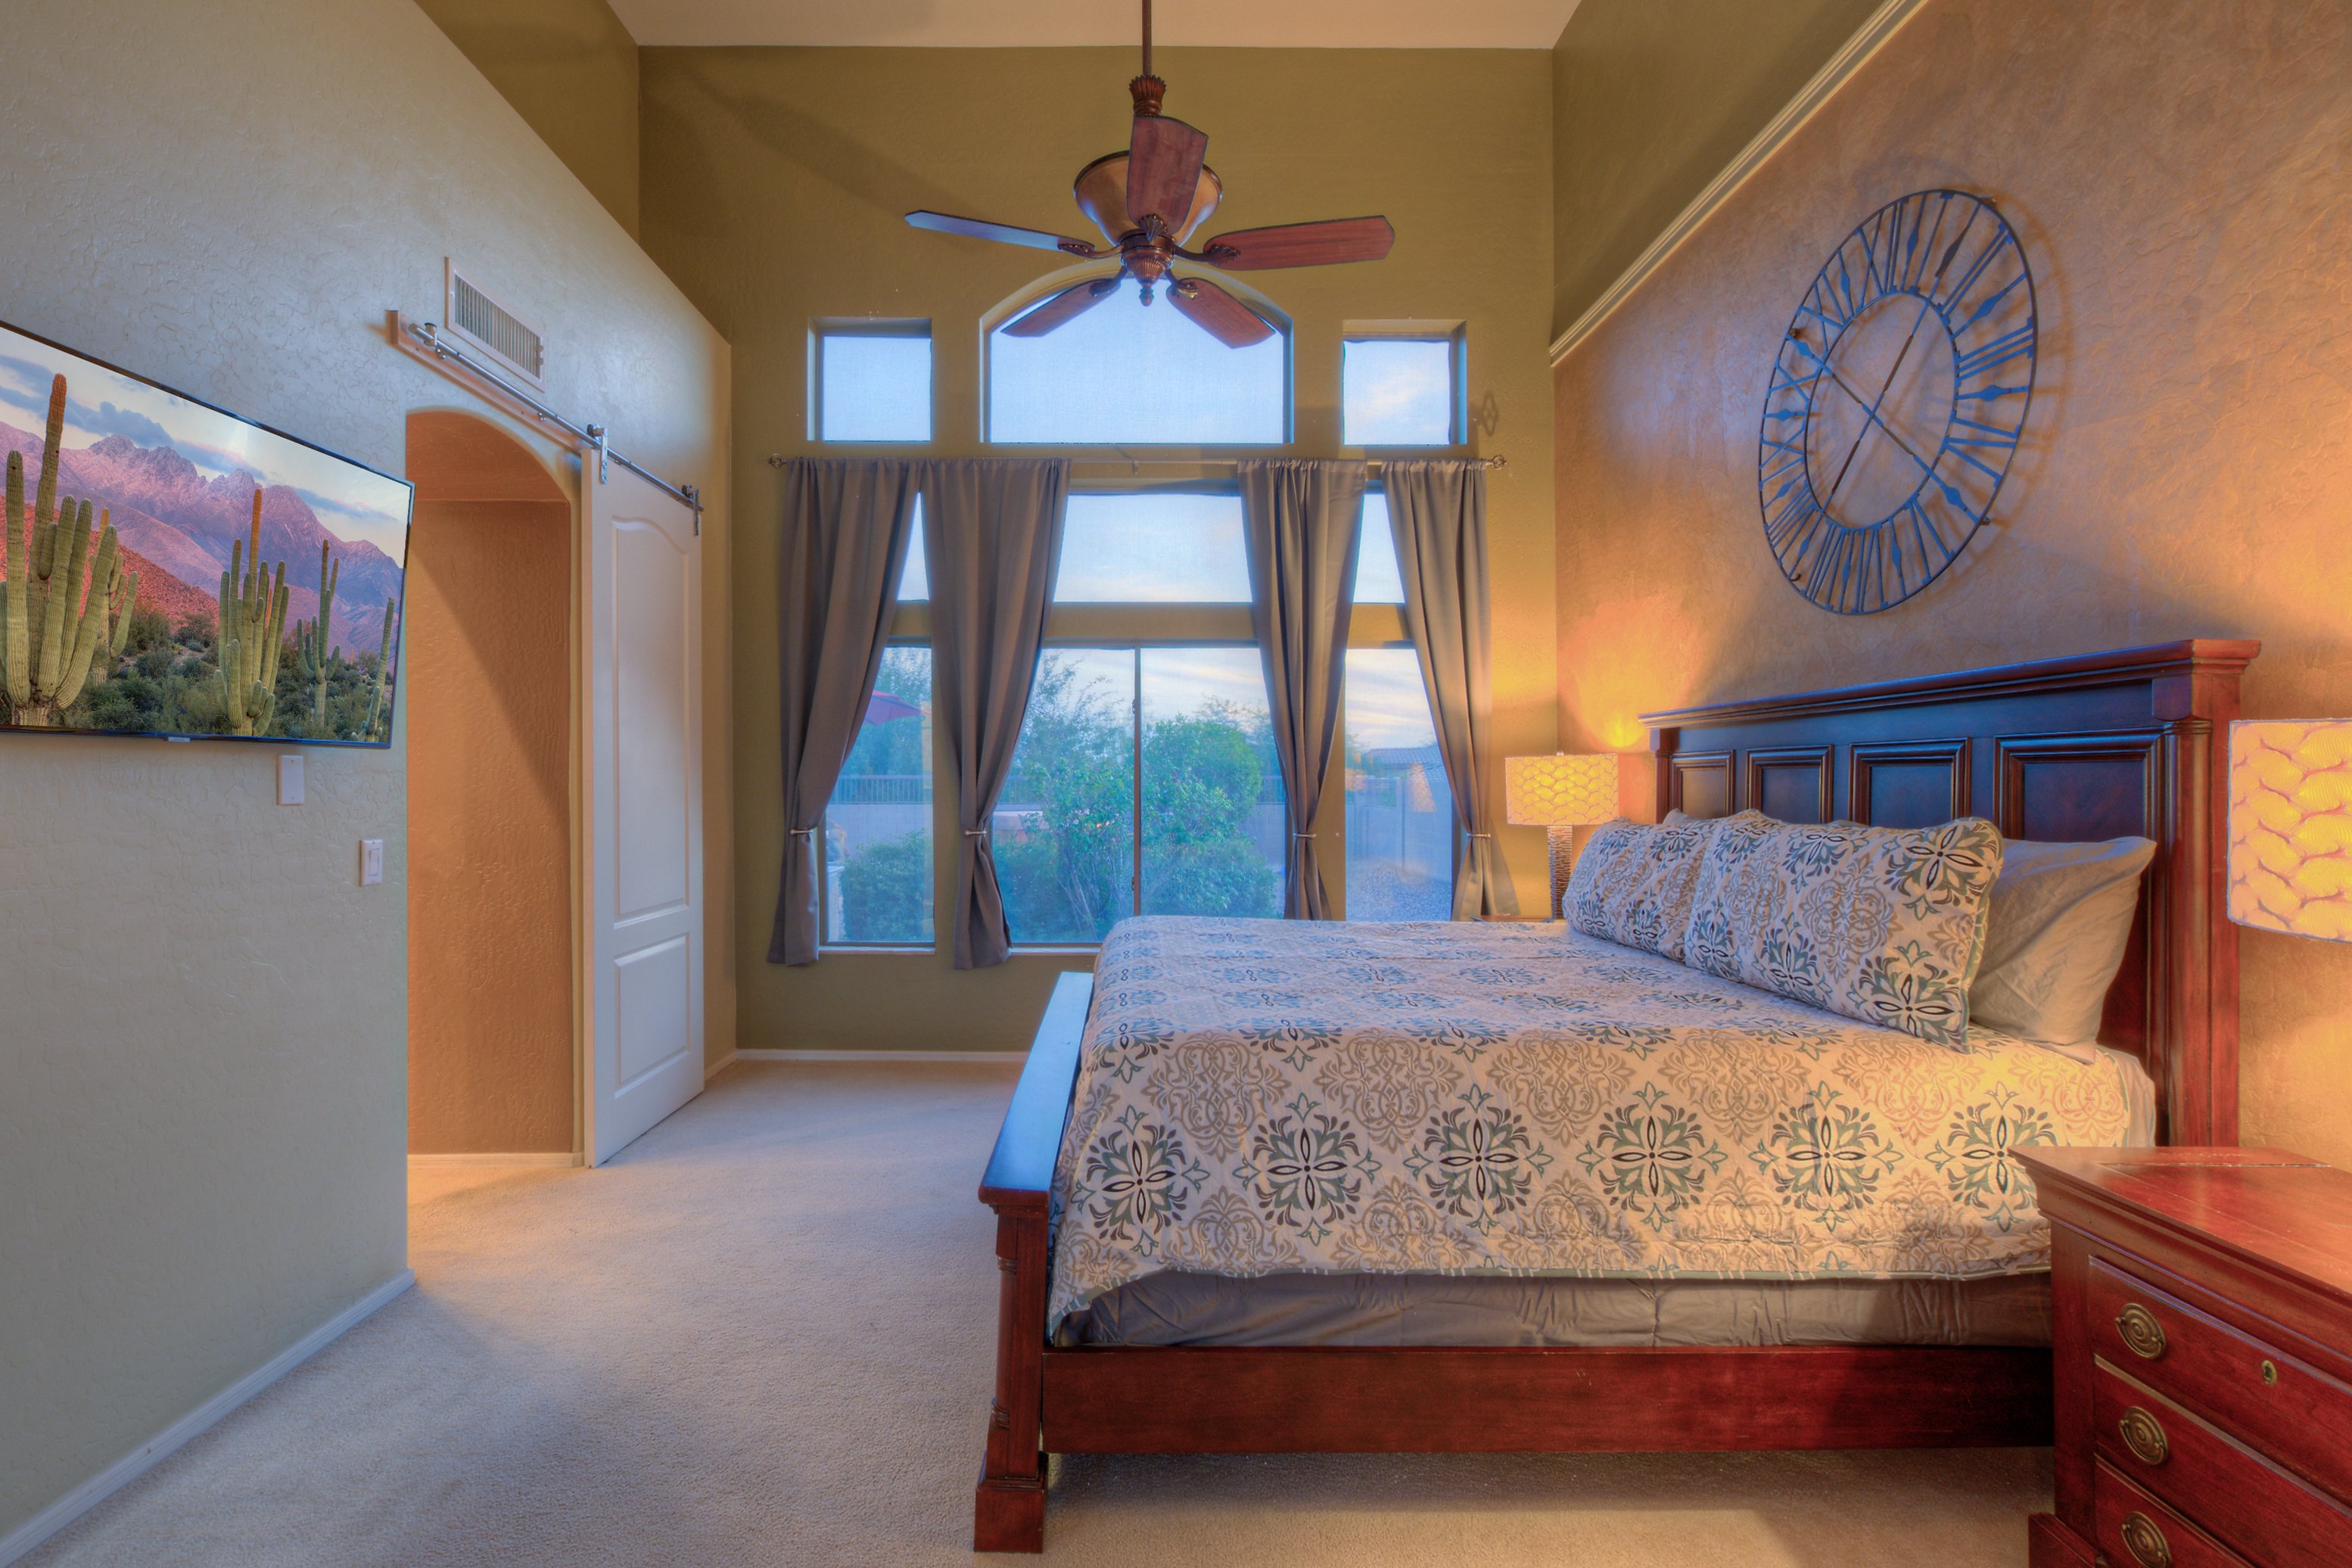 Seventh bedroom is on the ground floor and has a king bed, trey ceiling and magical view.